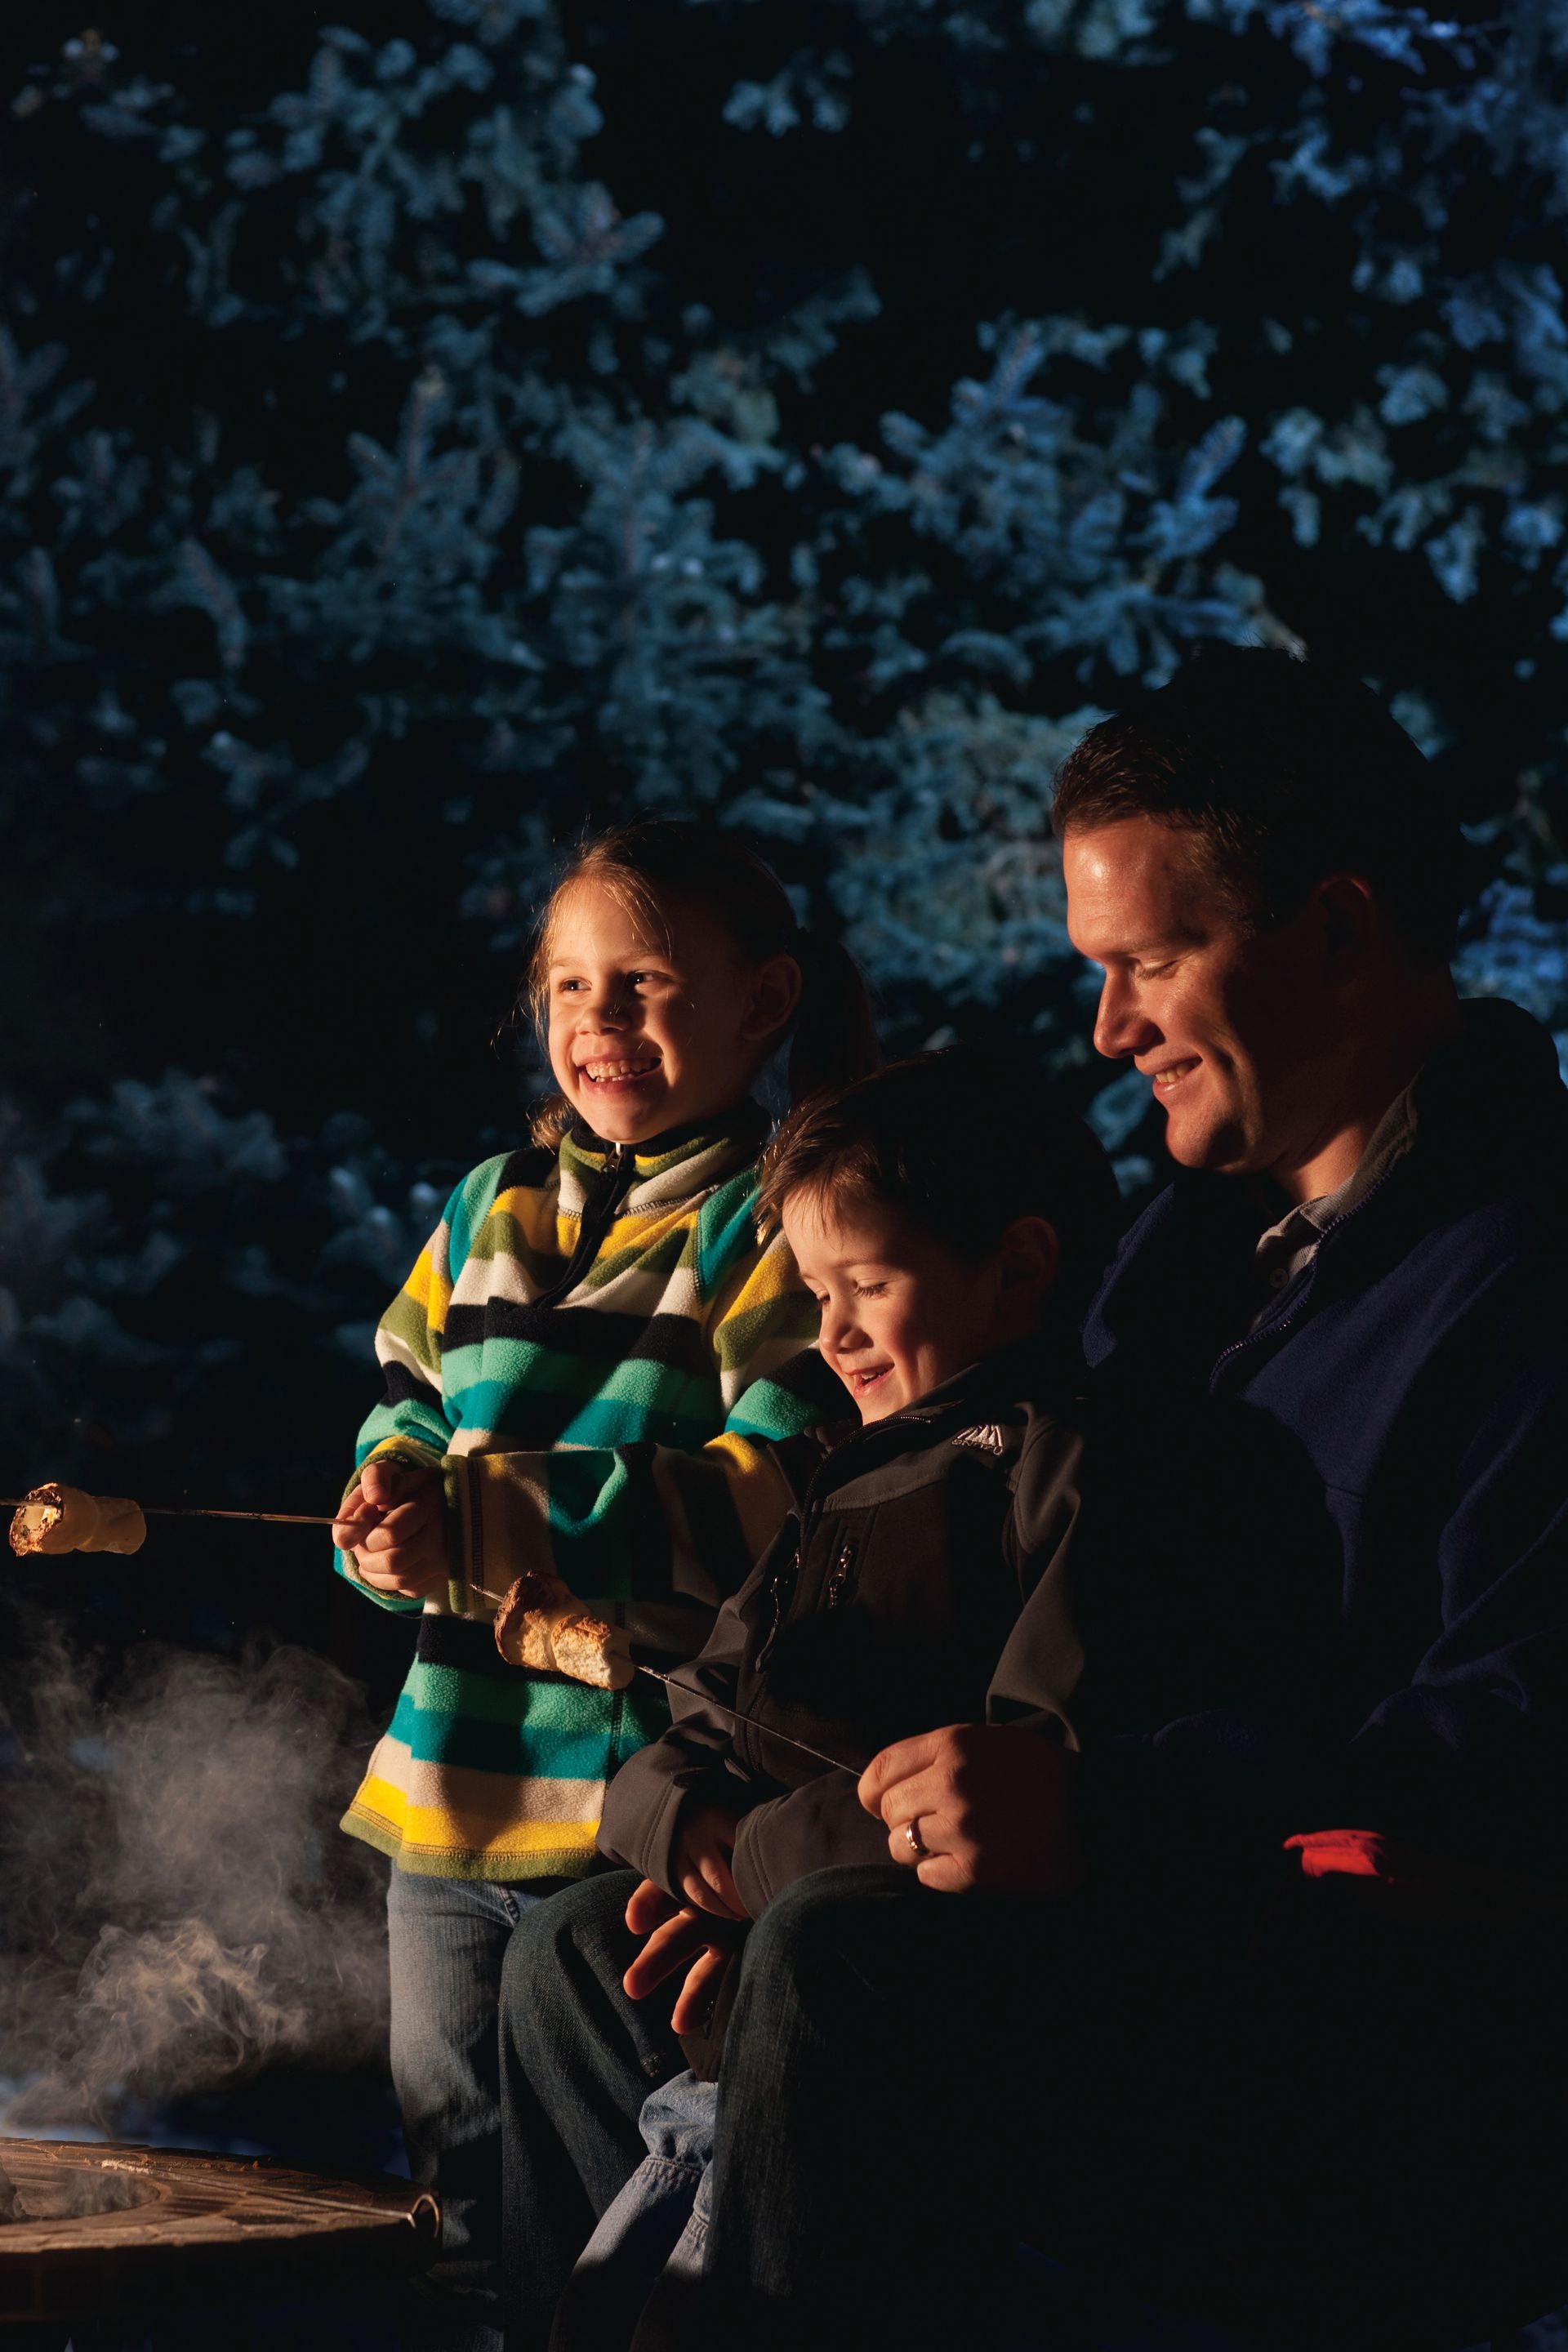 A father roasting marshmallows with his two young children.